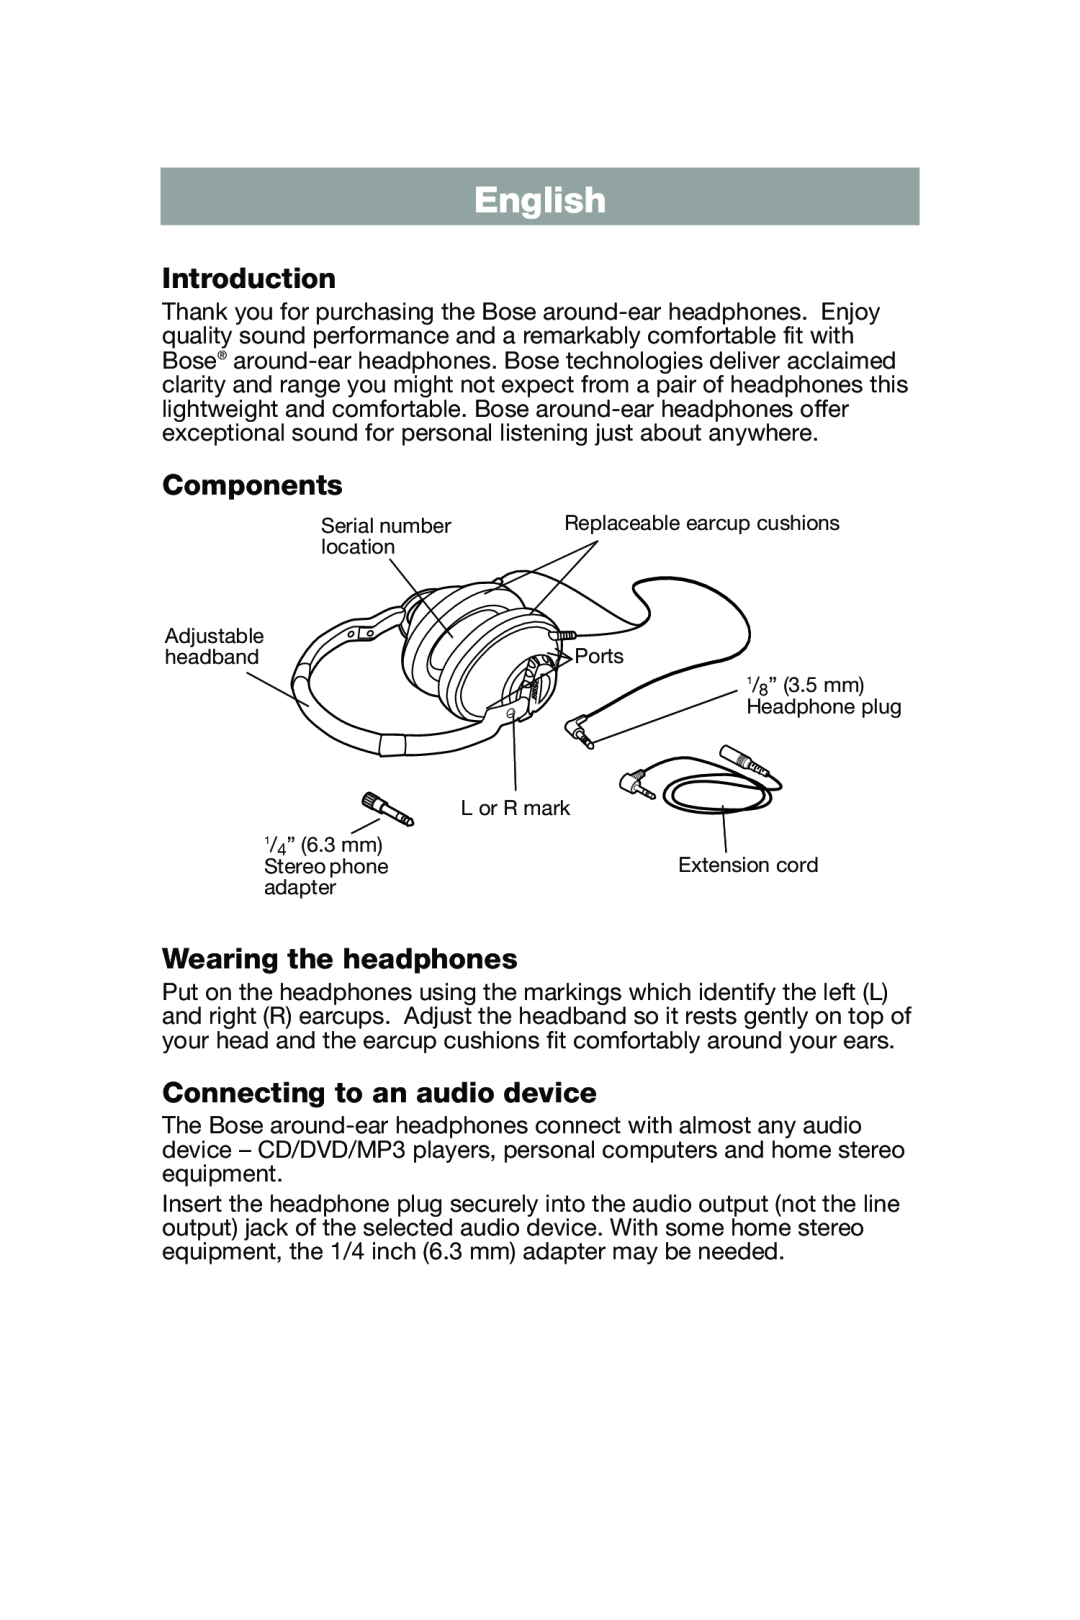 Bose AM299357 manual English, Introduction, Components, Wearing the headphones, Connecting to an audio device 